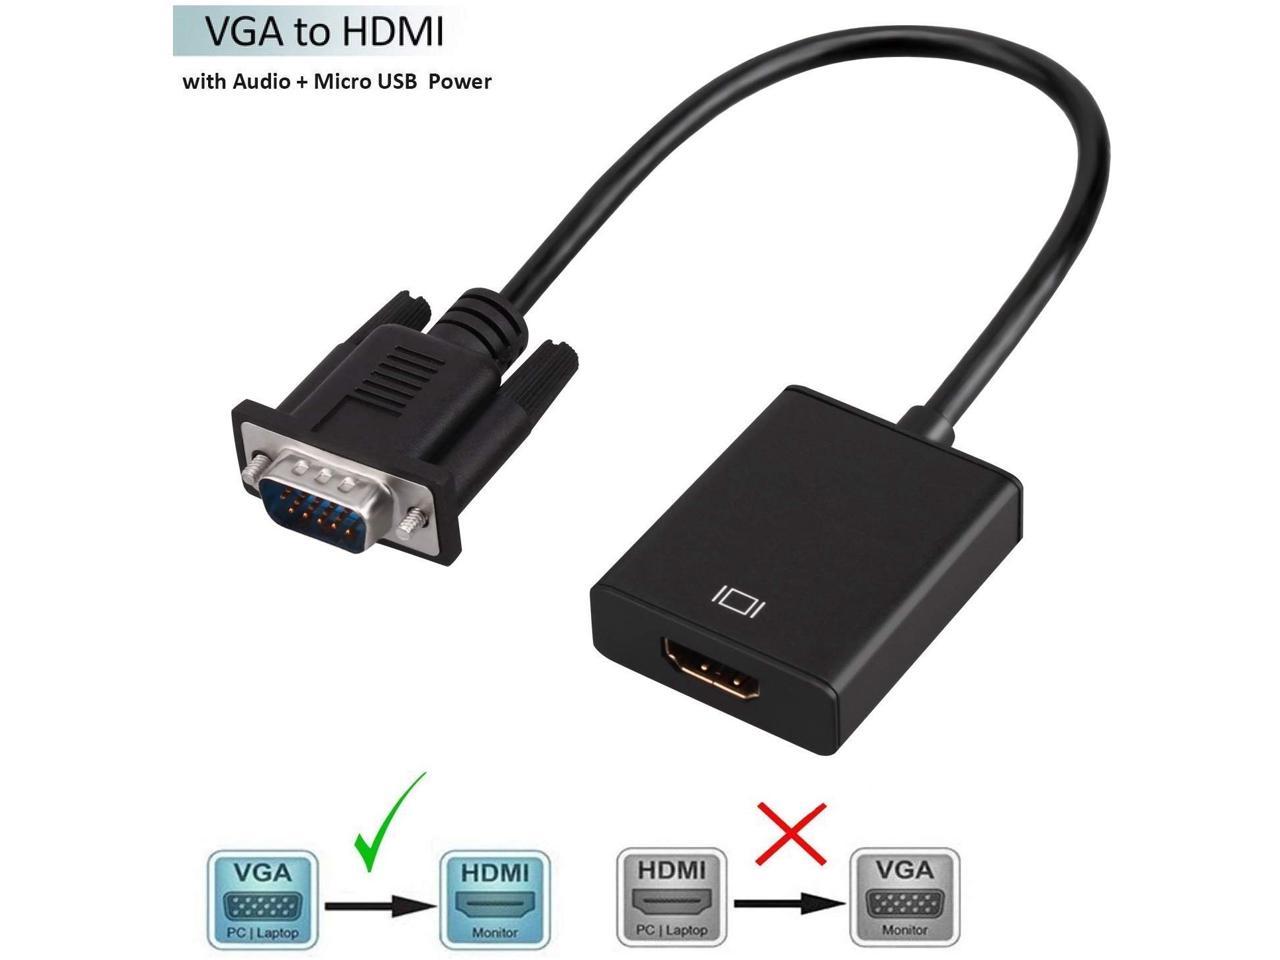 VGA to HDMI Adapter Cable, VGA Male to HDMI Female Cable 